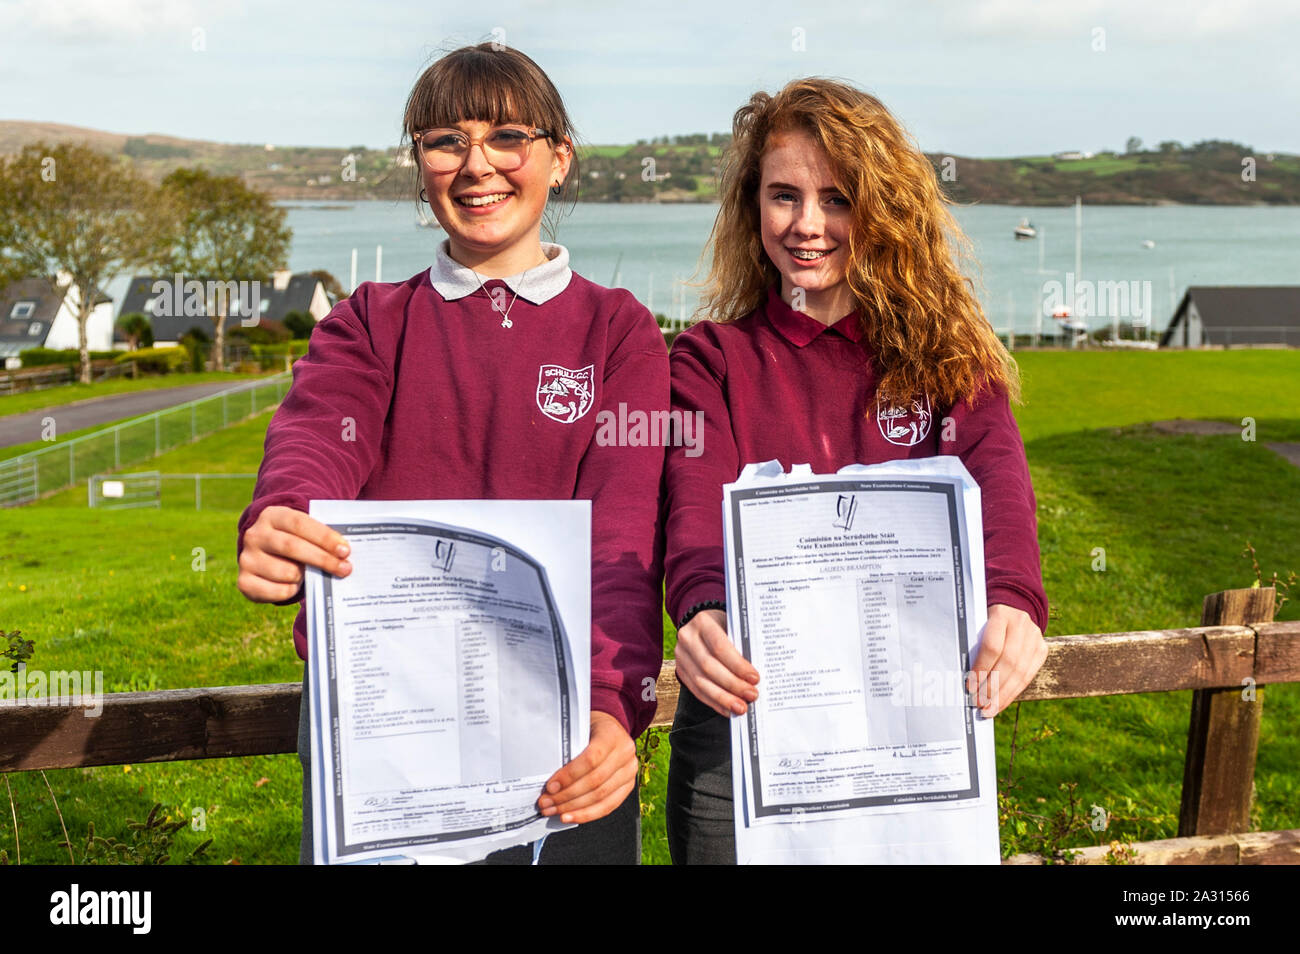 Schull, West Cork, Ireland. 4th Oct, 2019. Over 64,000 students around Ireland received their Junior Cert results this afternoon. In Schull Community College, West Cork, many students were beside themselves with happiness on seeing their results. Pictured with their results are Rhiannon McGrath, Ballydehob and Lauren Brampton, Kilcrohane. Credit: Andy Gibson/Alamy Live News. Stock Photo